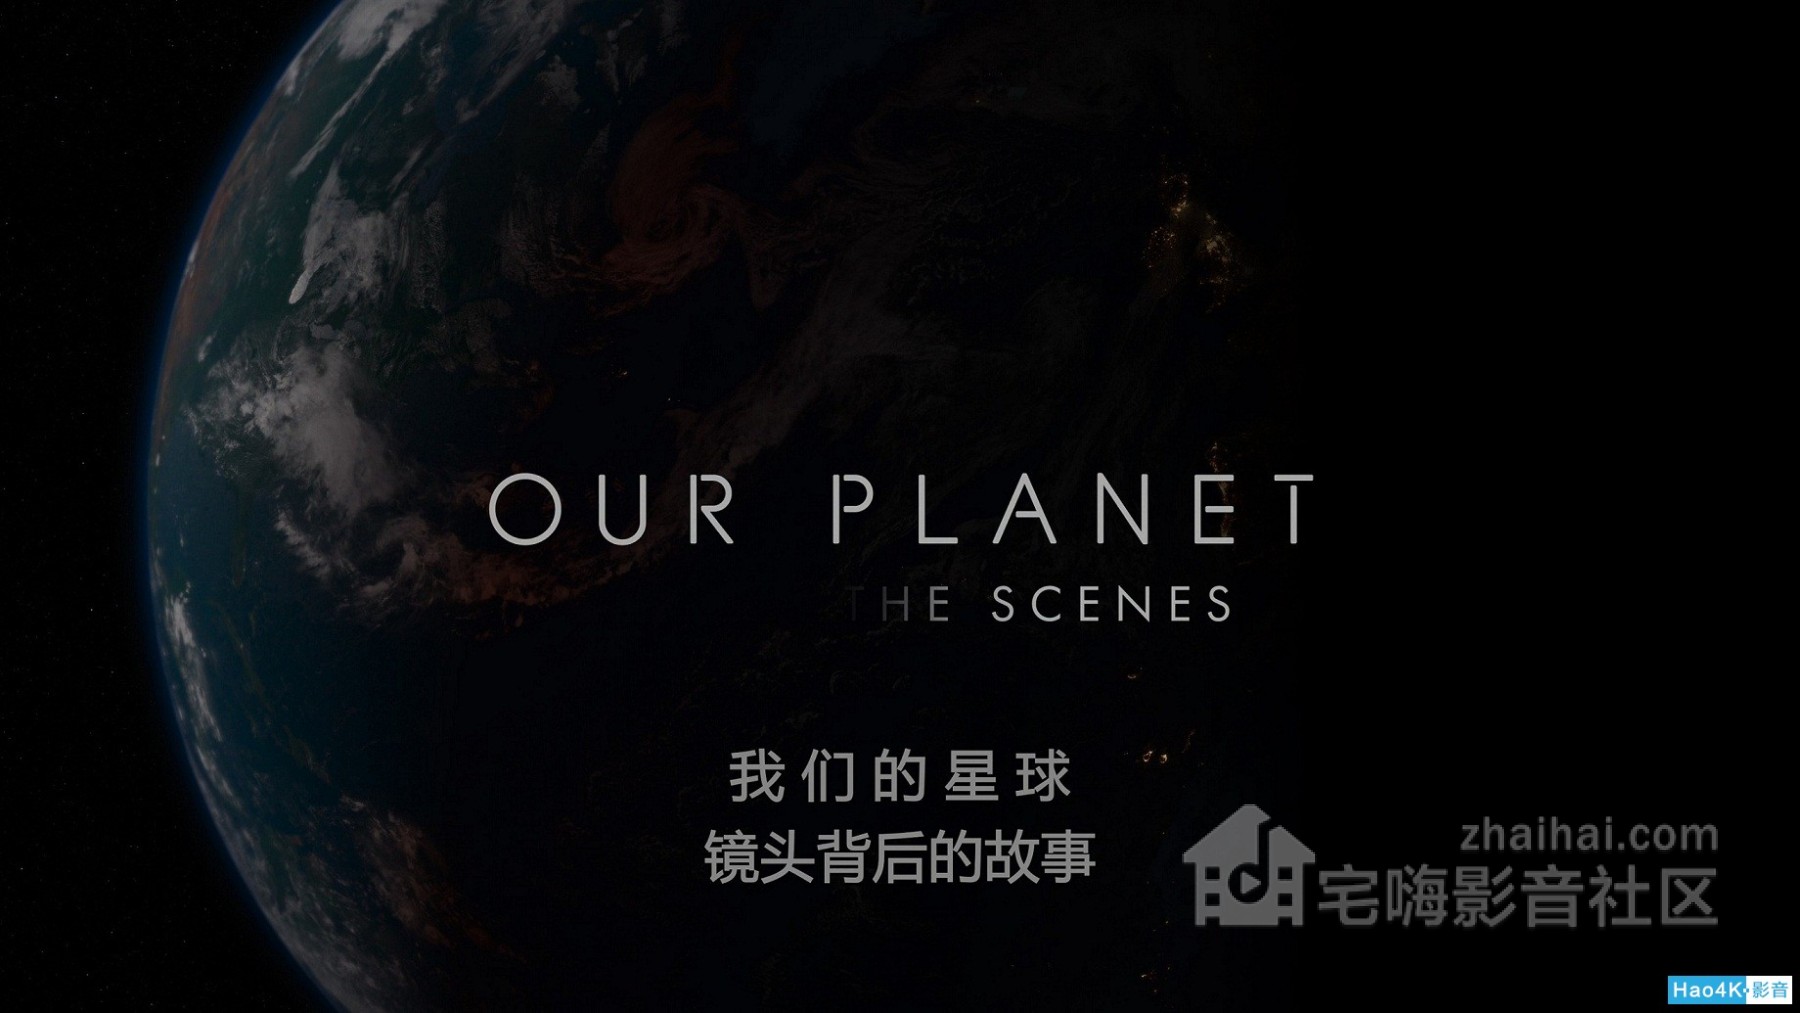 Our.Planet.Behind.the.Scenes.2019.2160p.WEB-DL.Atmos.DDP5.1.HDR.H.265.mkv_202005.jpg